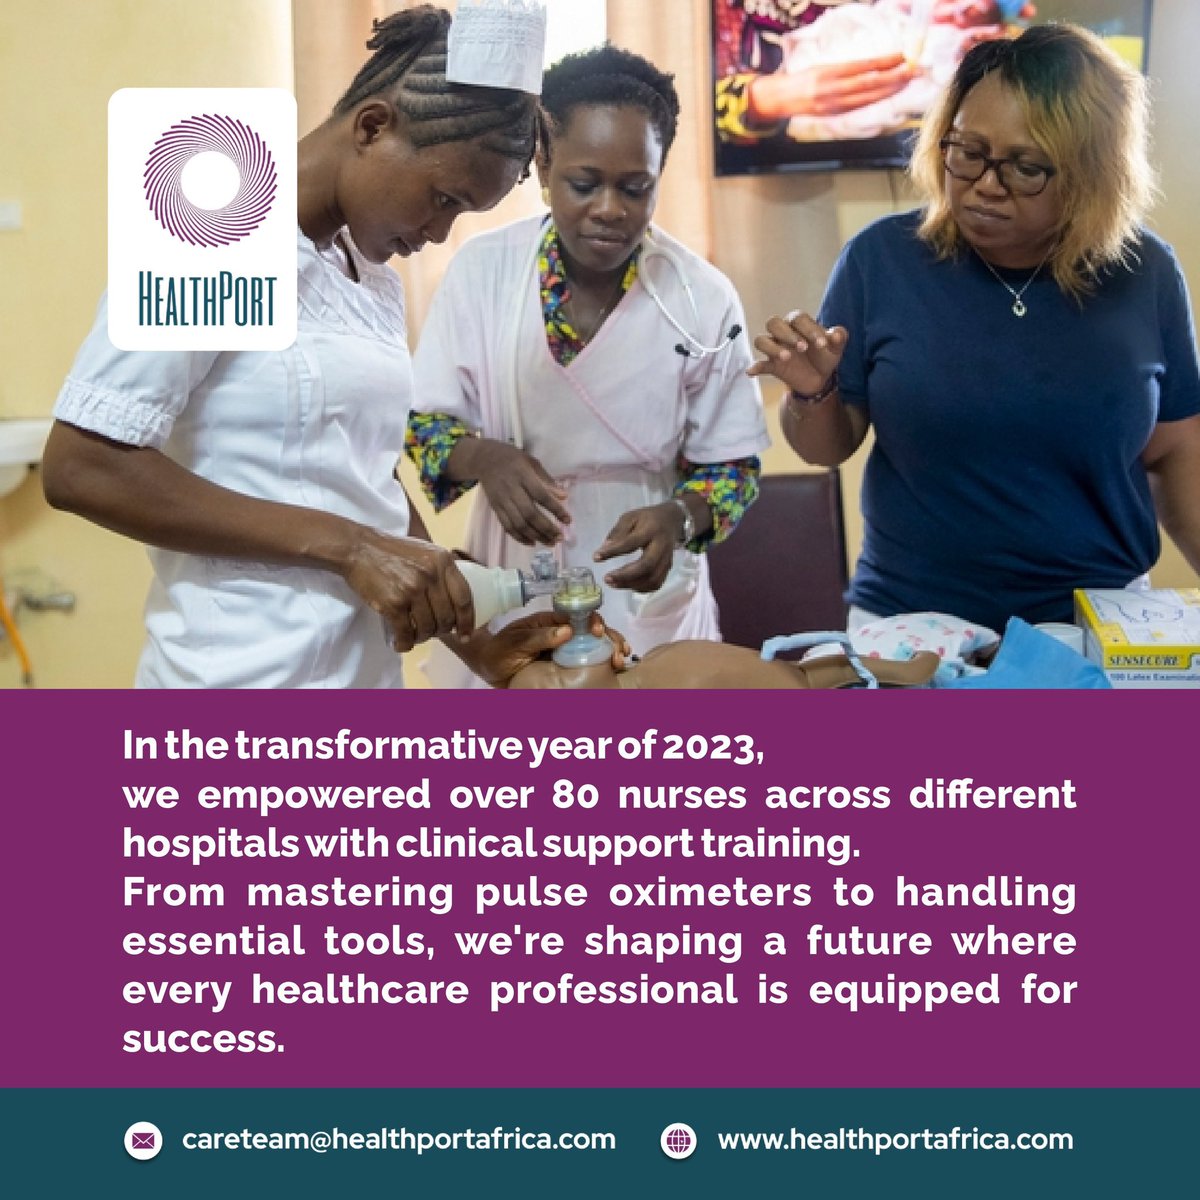 From mastering the intricacies of pulse oximeters to proficiently handling essential medical tools, this training initiative is dedicated to advancing healthcare excellence and building a robust foundation for the practitioners of tomorrow.

#HealthPortCares #ClinicalTraining